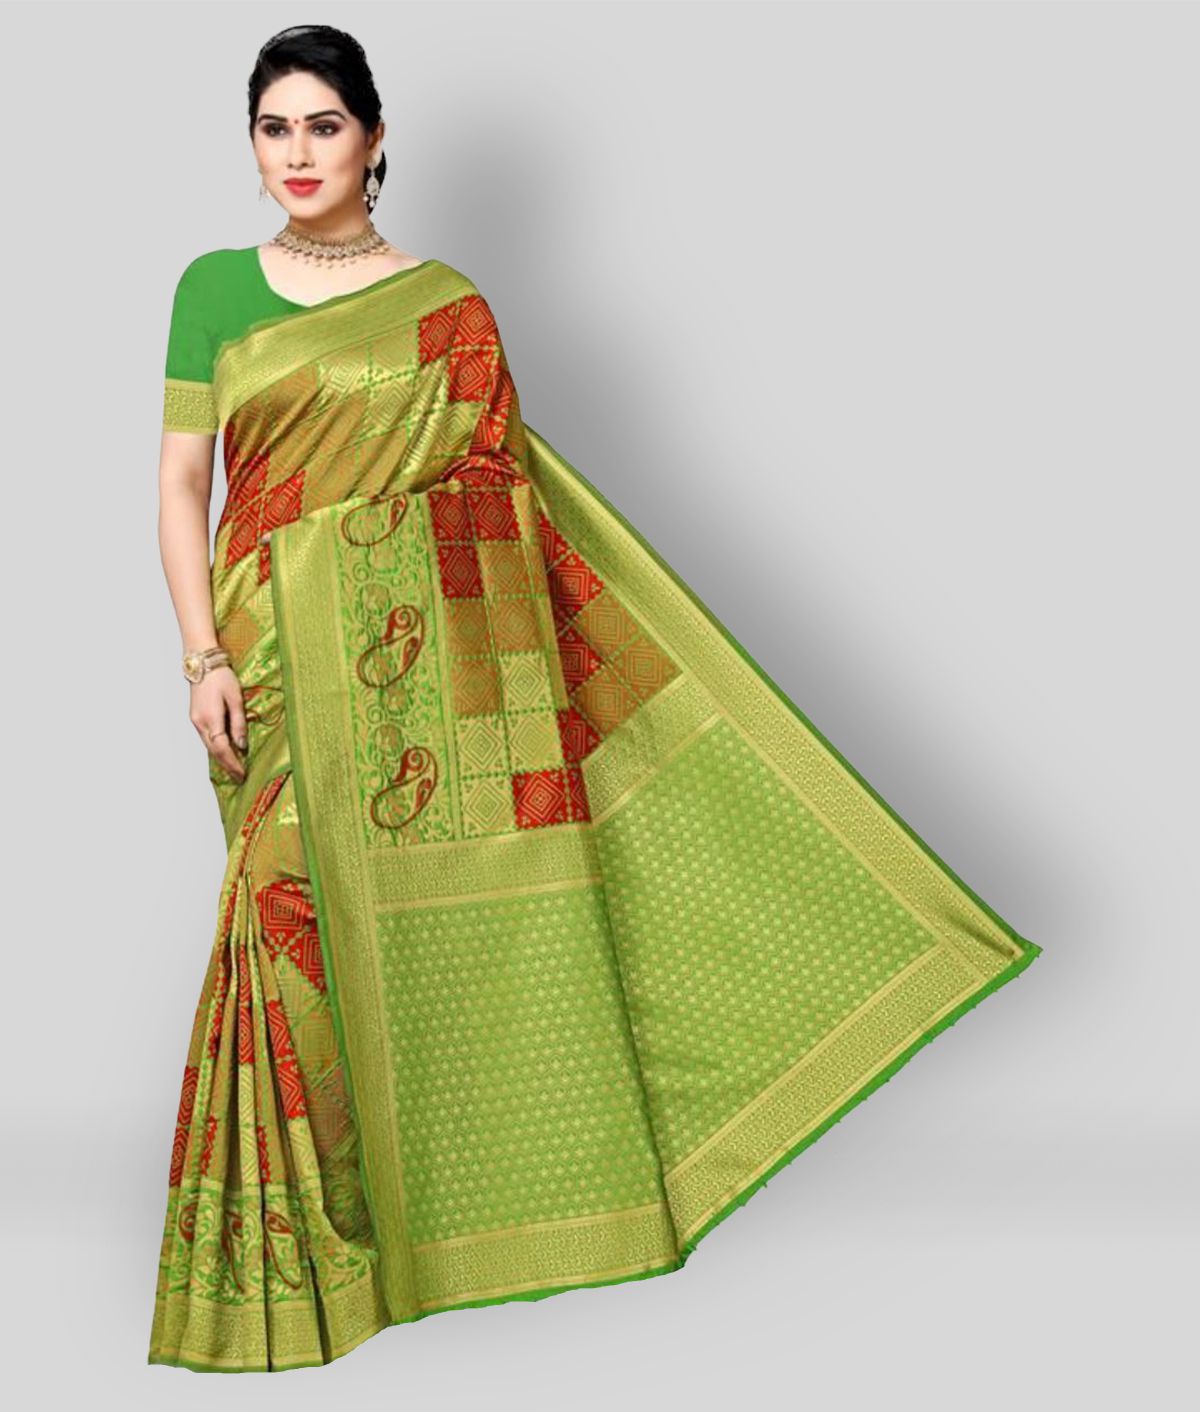 NENCY FASHION - Multicolor Banarasi Silk Saree With Blouse Piece (Pack of 1)